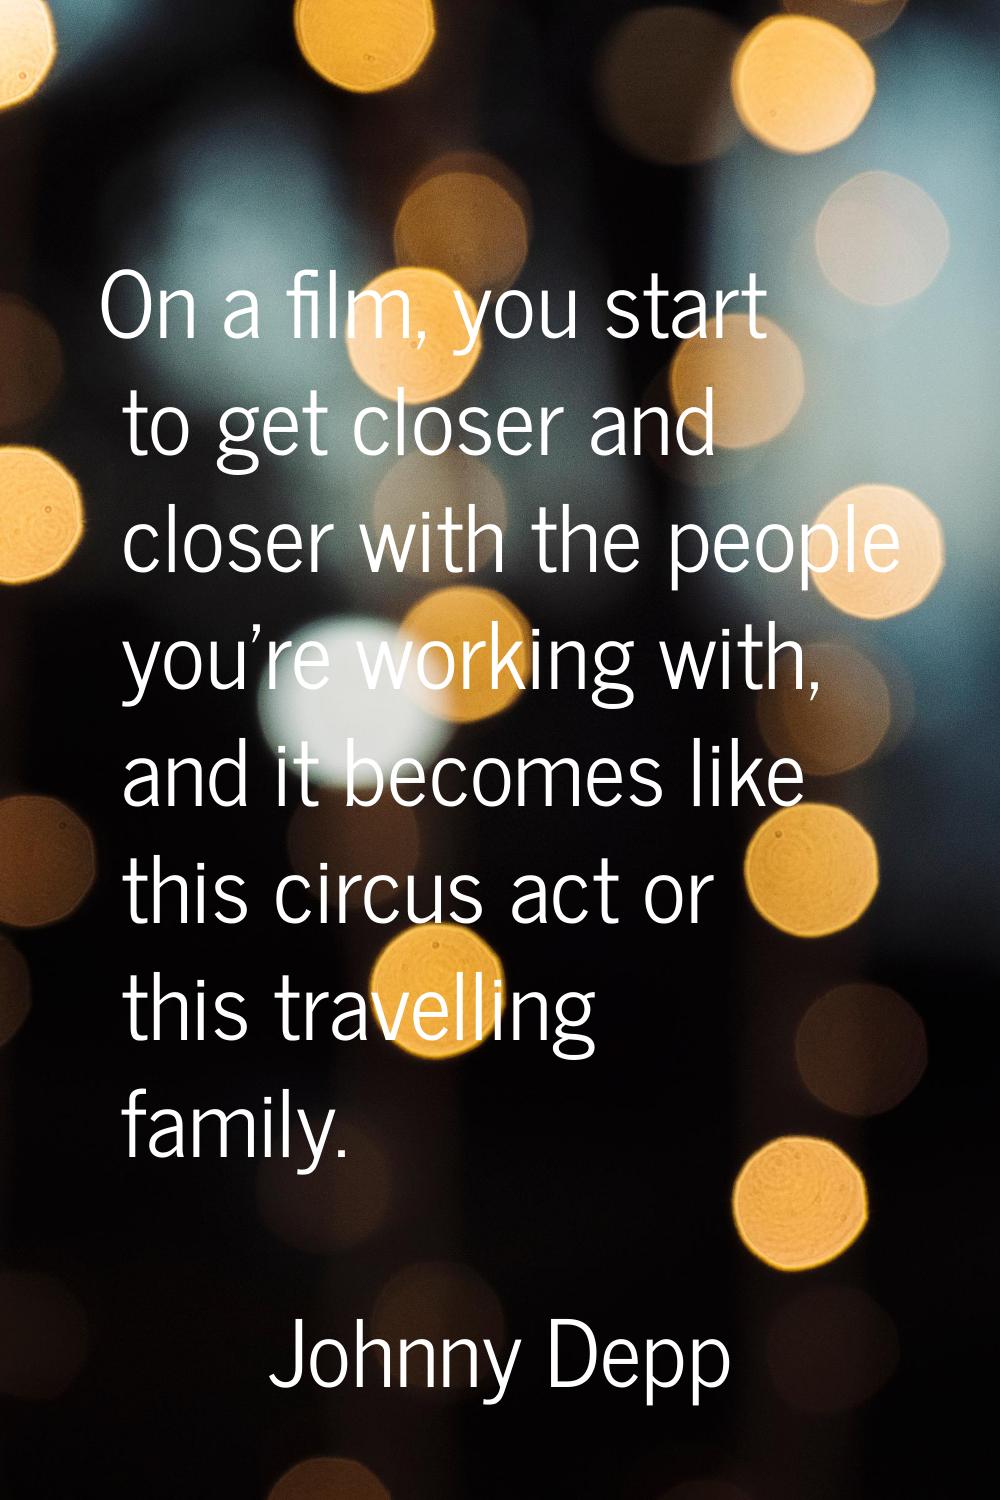 On a film, you start to get closer and closer with the people you're working with, and it becomes l